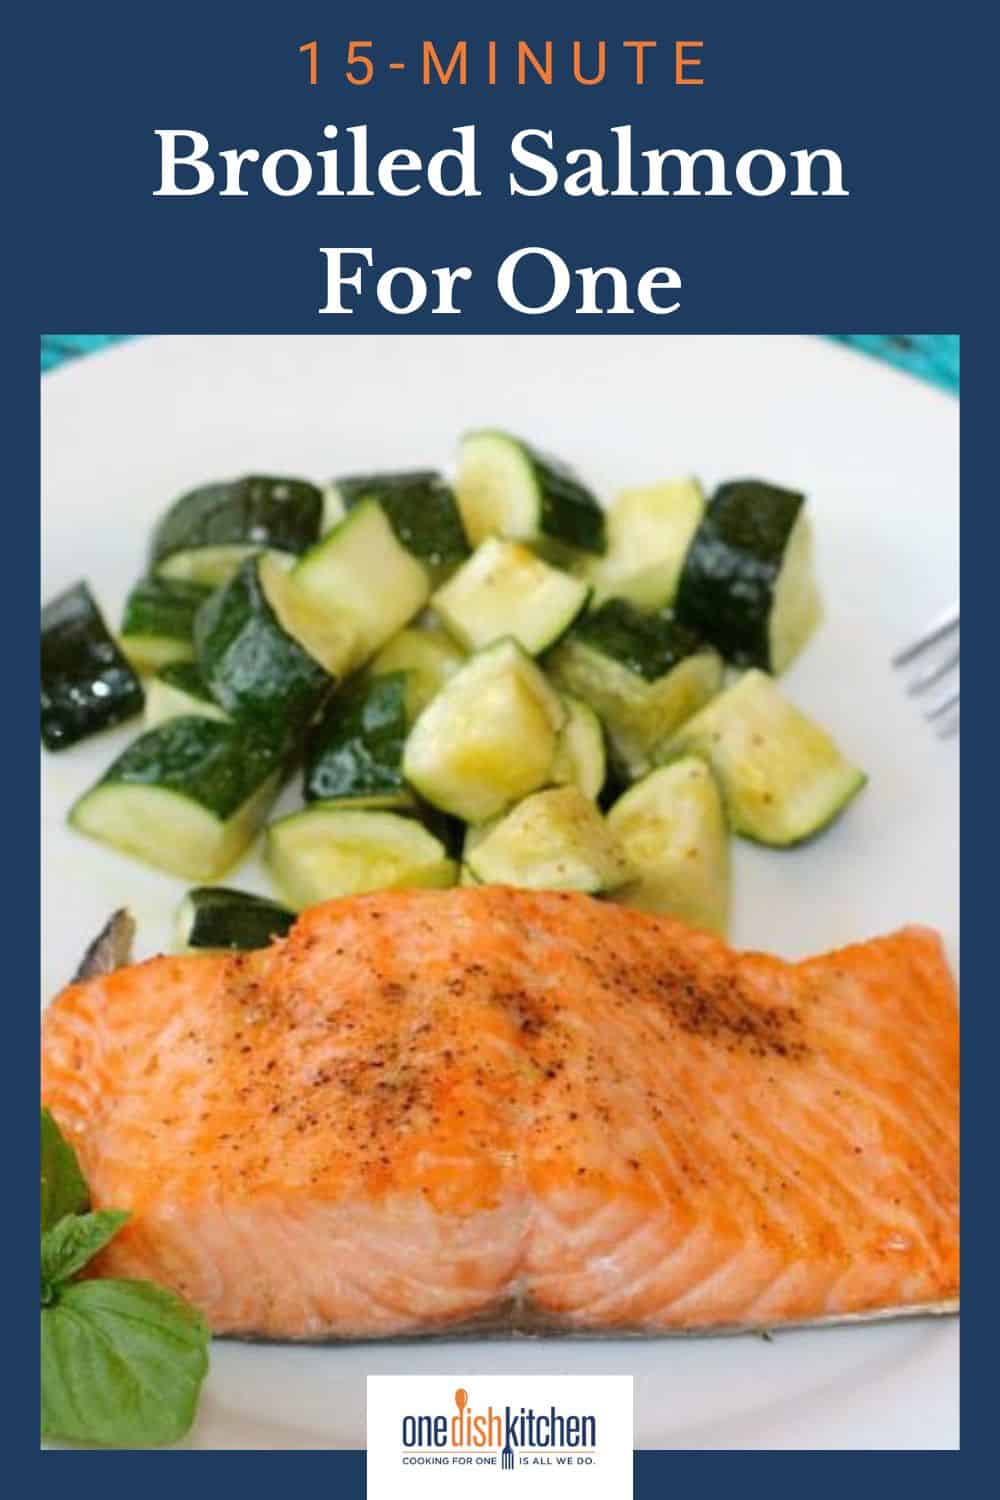 Easy Broiled Salmon Recipe - Single Serving - One Dish Kitchen